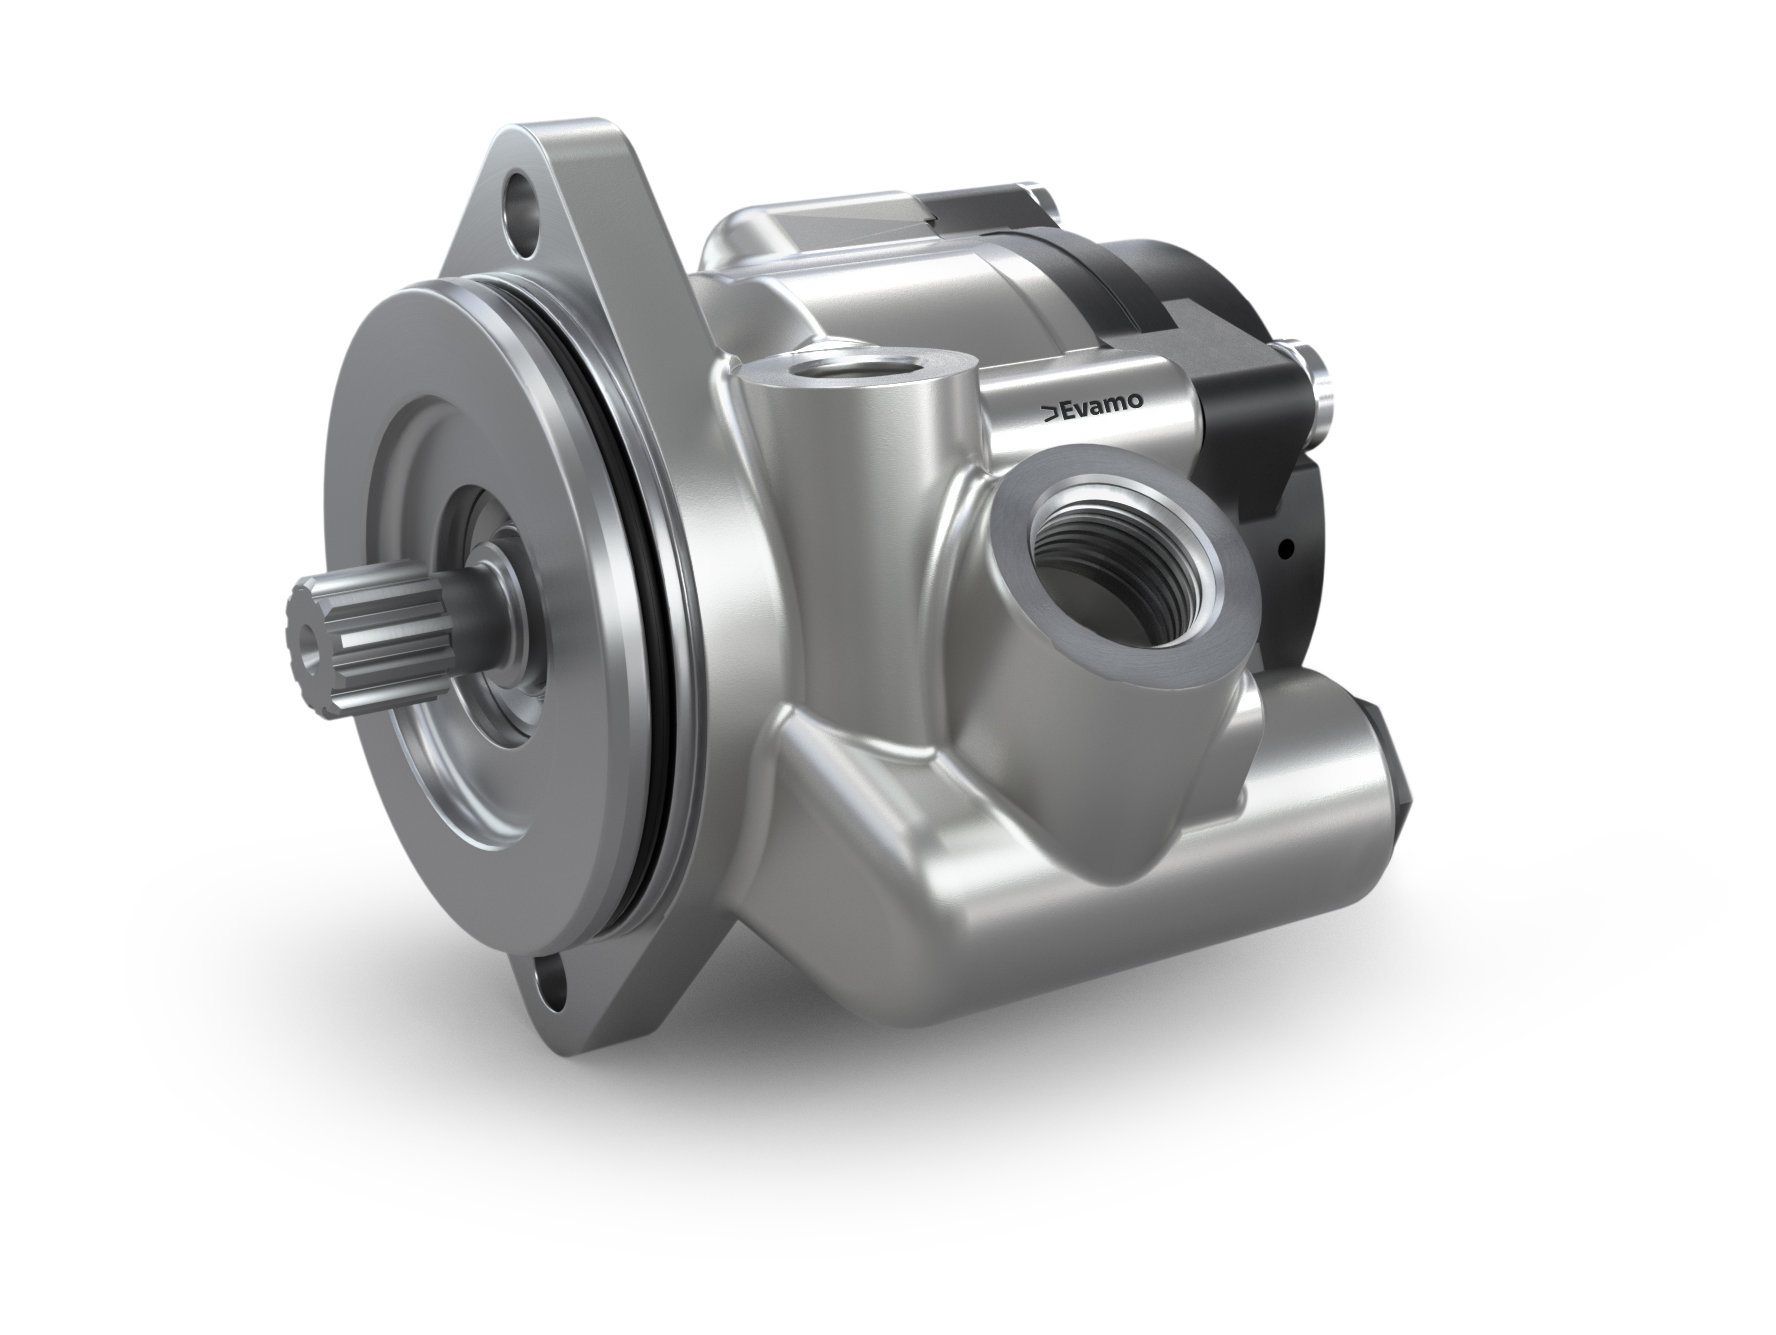 The innovative product design of the FN4 commercial vehicle power steering pump allows connection to the air compressor or an engine power take-off.ensure energy savings for commercial vehicles.